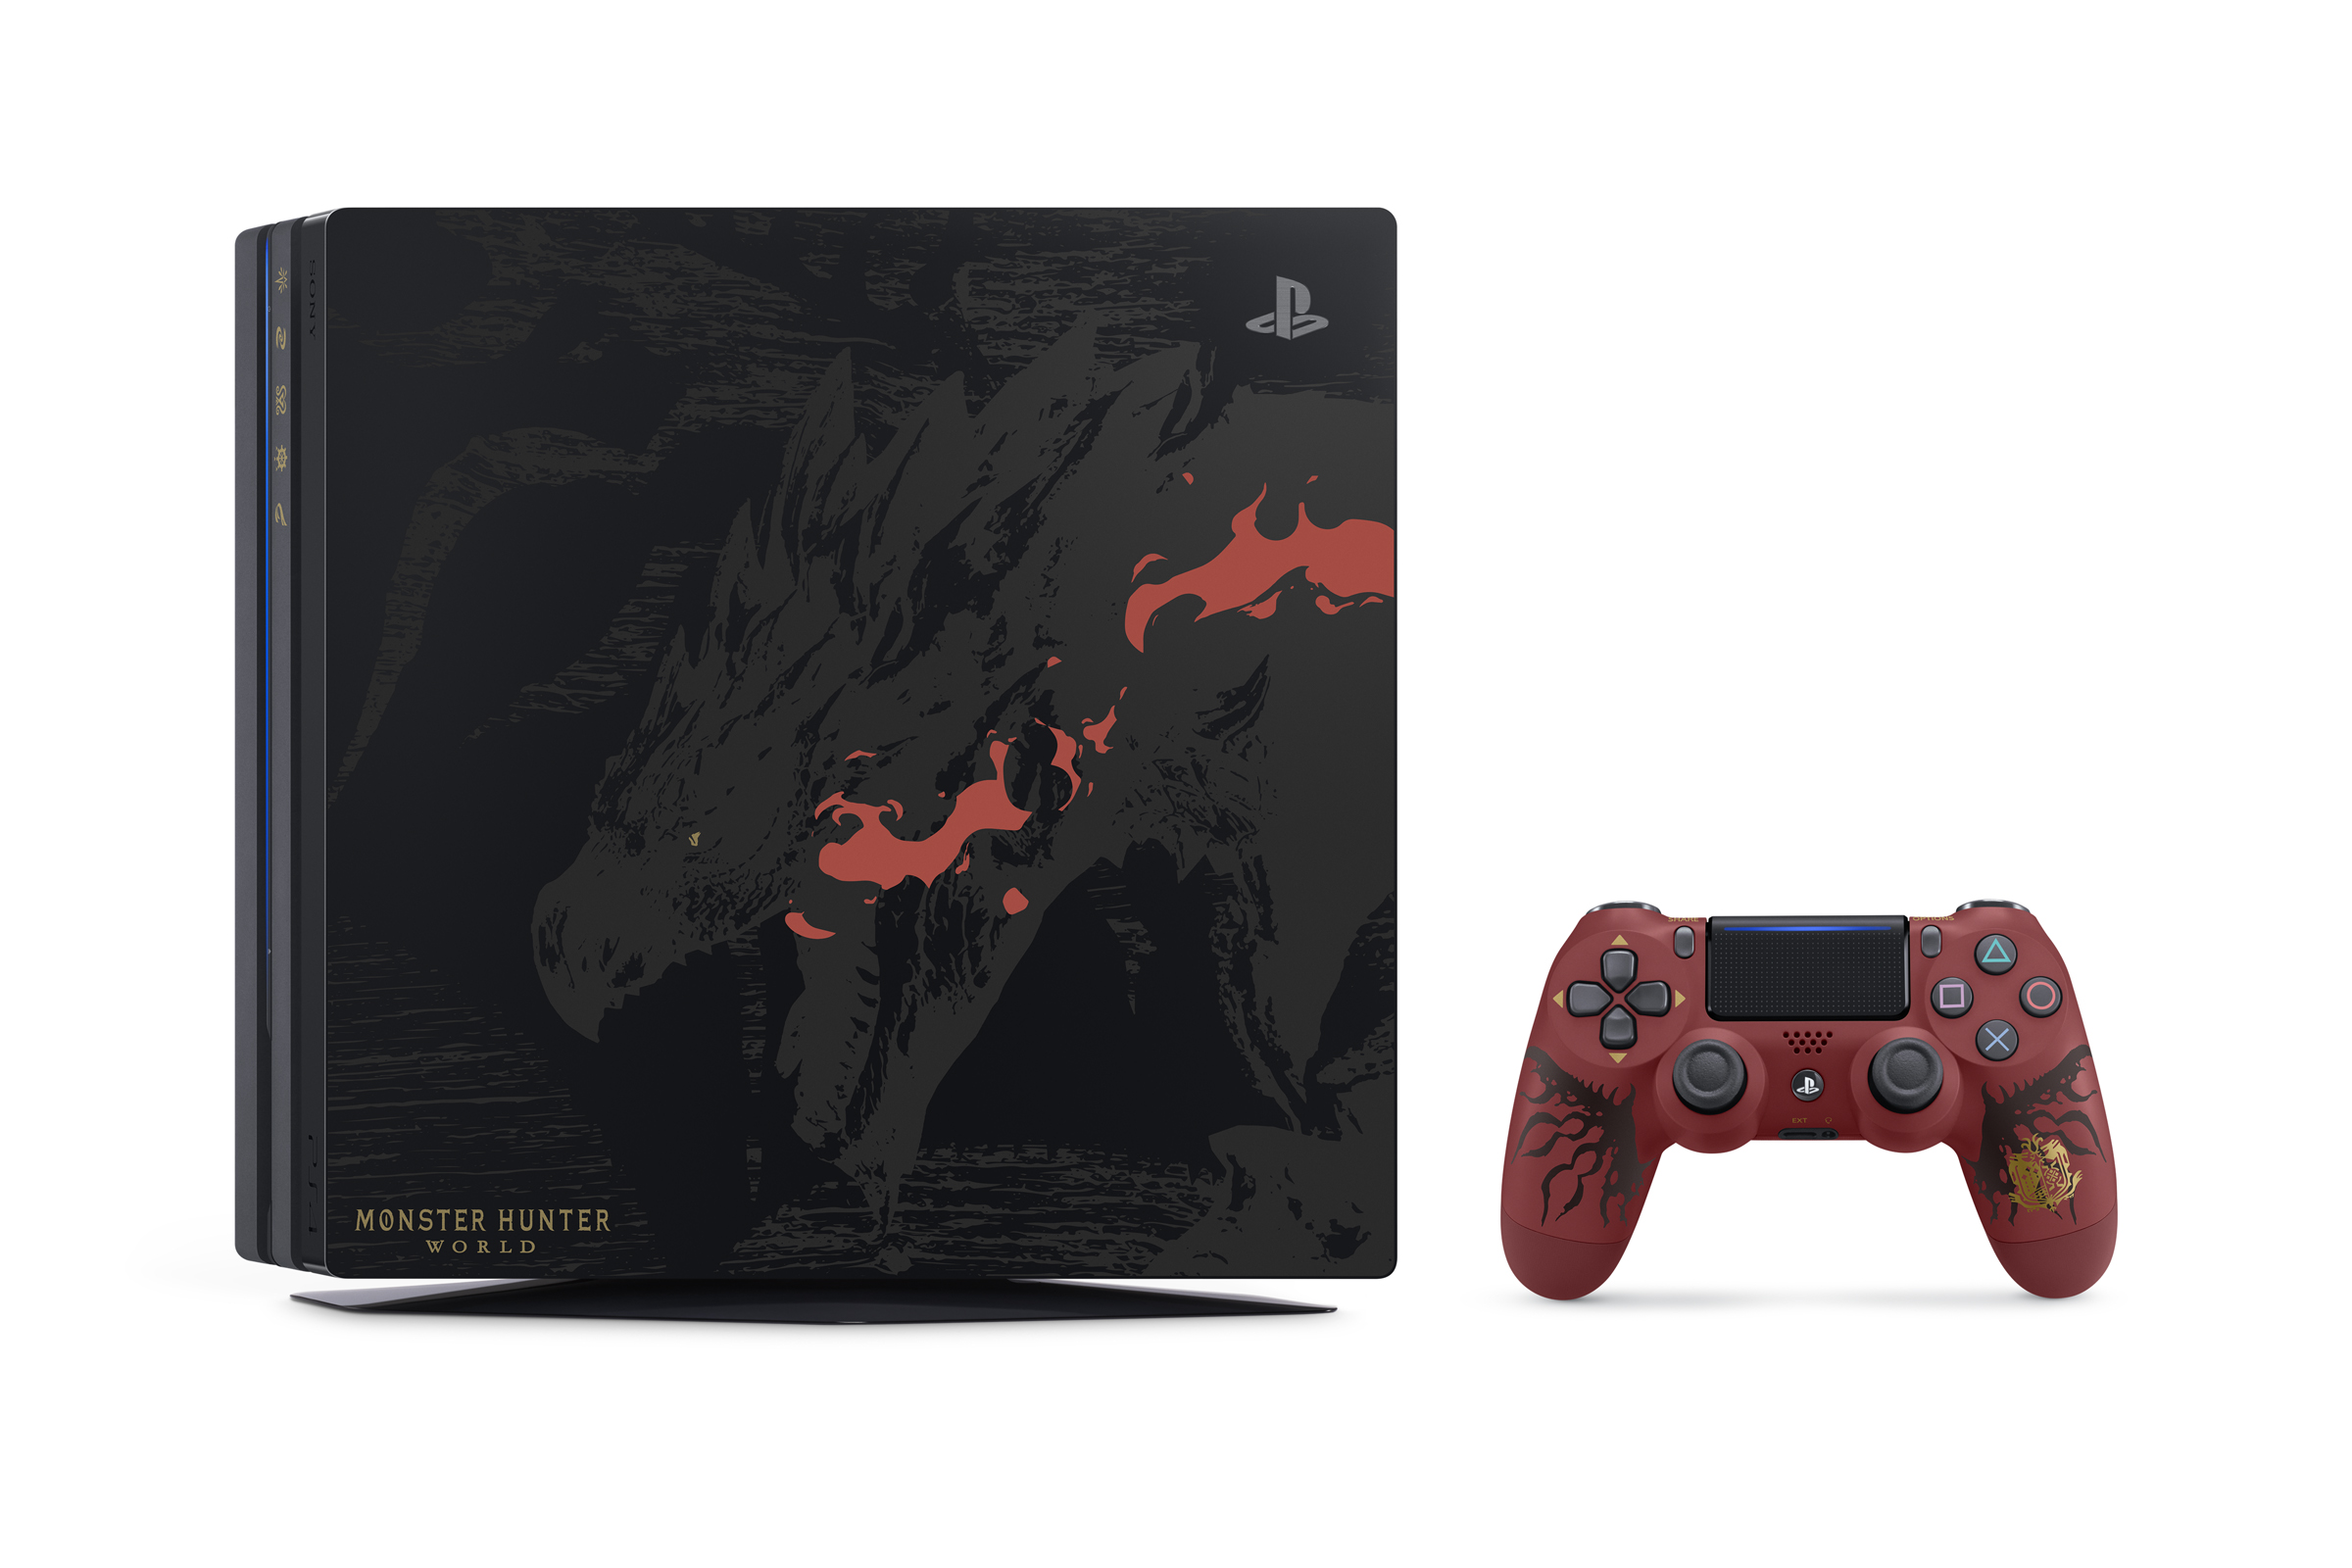 This PlayStation 4 Pro Monster Hunter: World Rathalos Edition is what occupies our mind right now